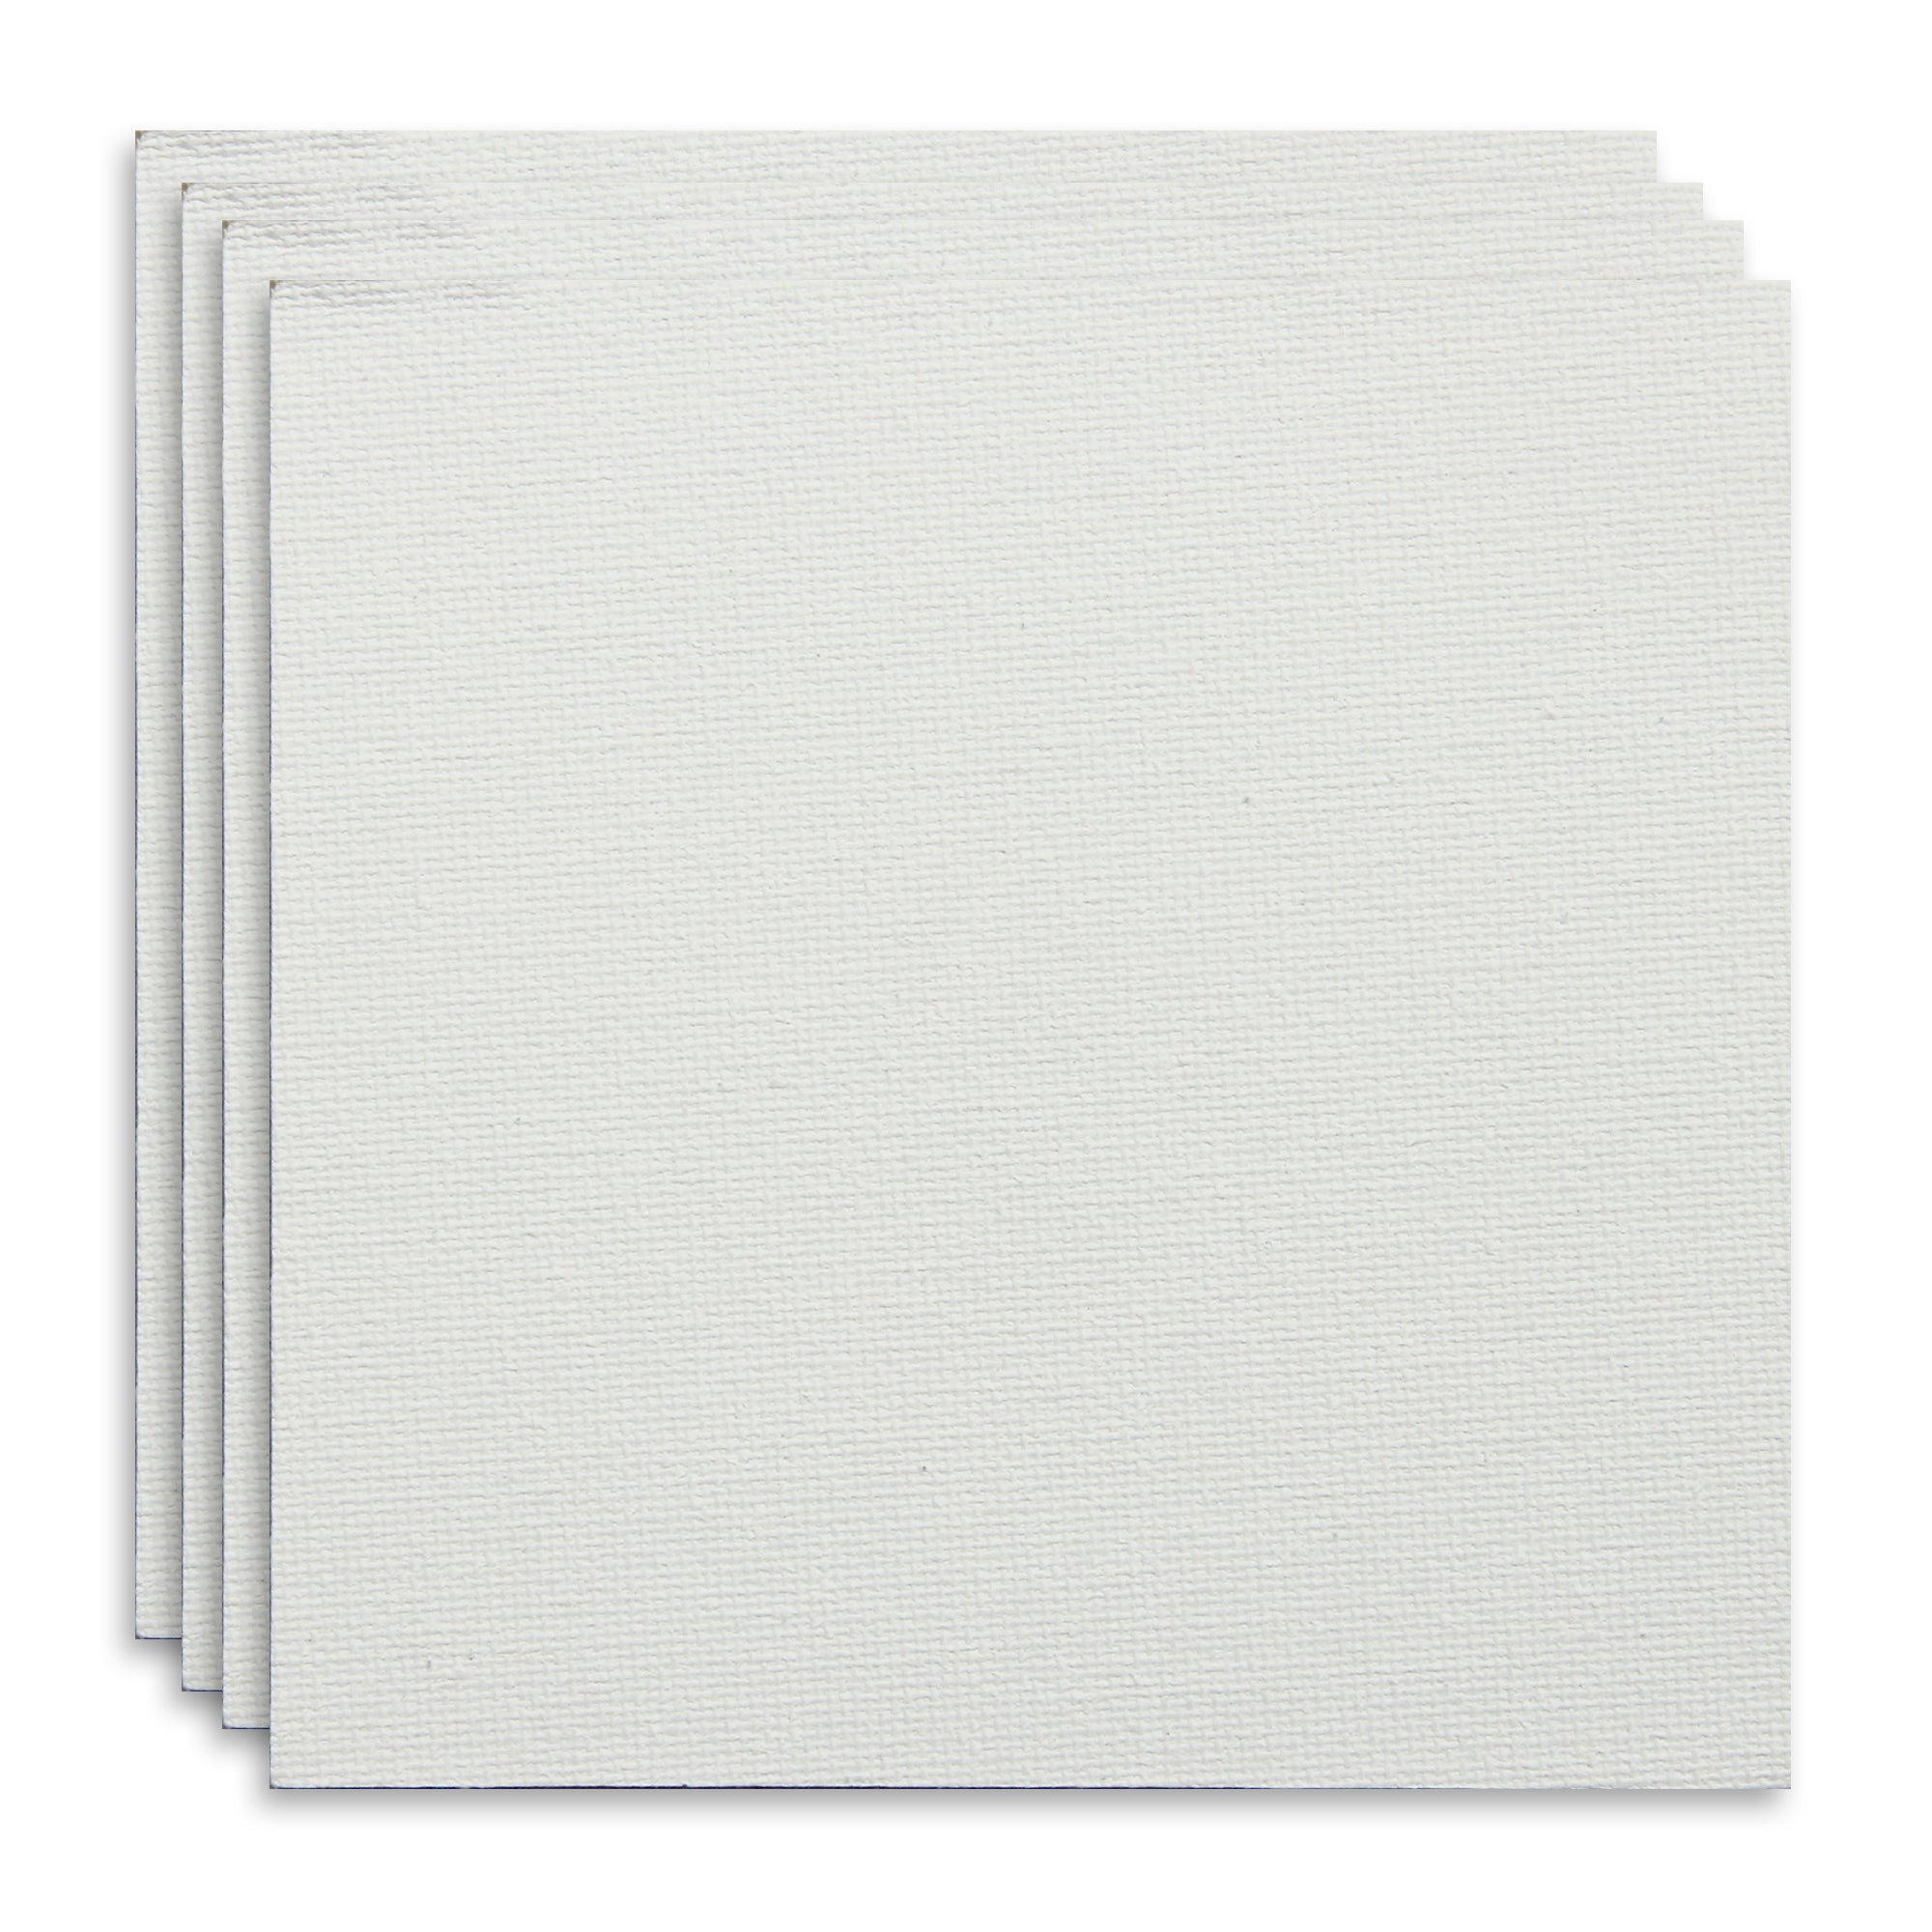 Canvas Board Square 6 X 6Inch 230Gsm 2Mm Thick 4Pc Shrink Lb